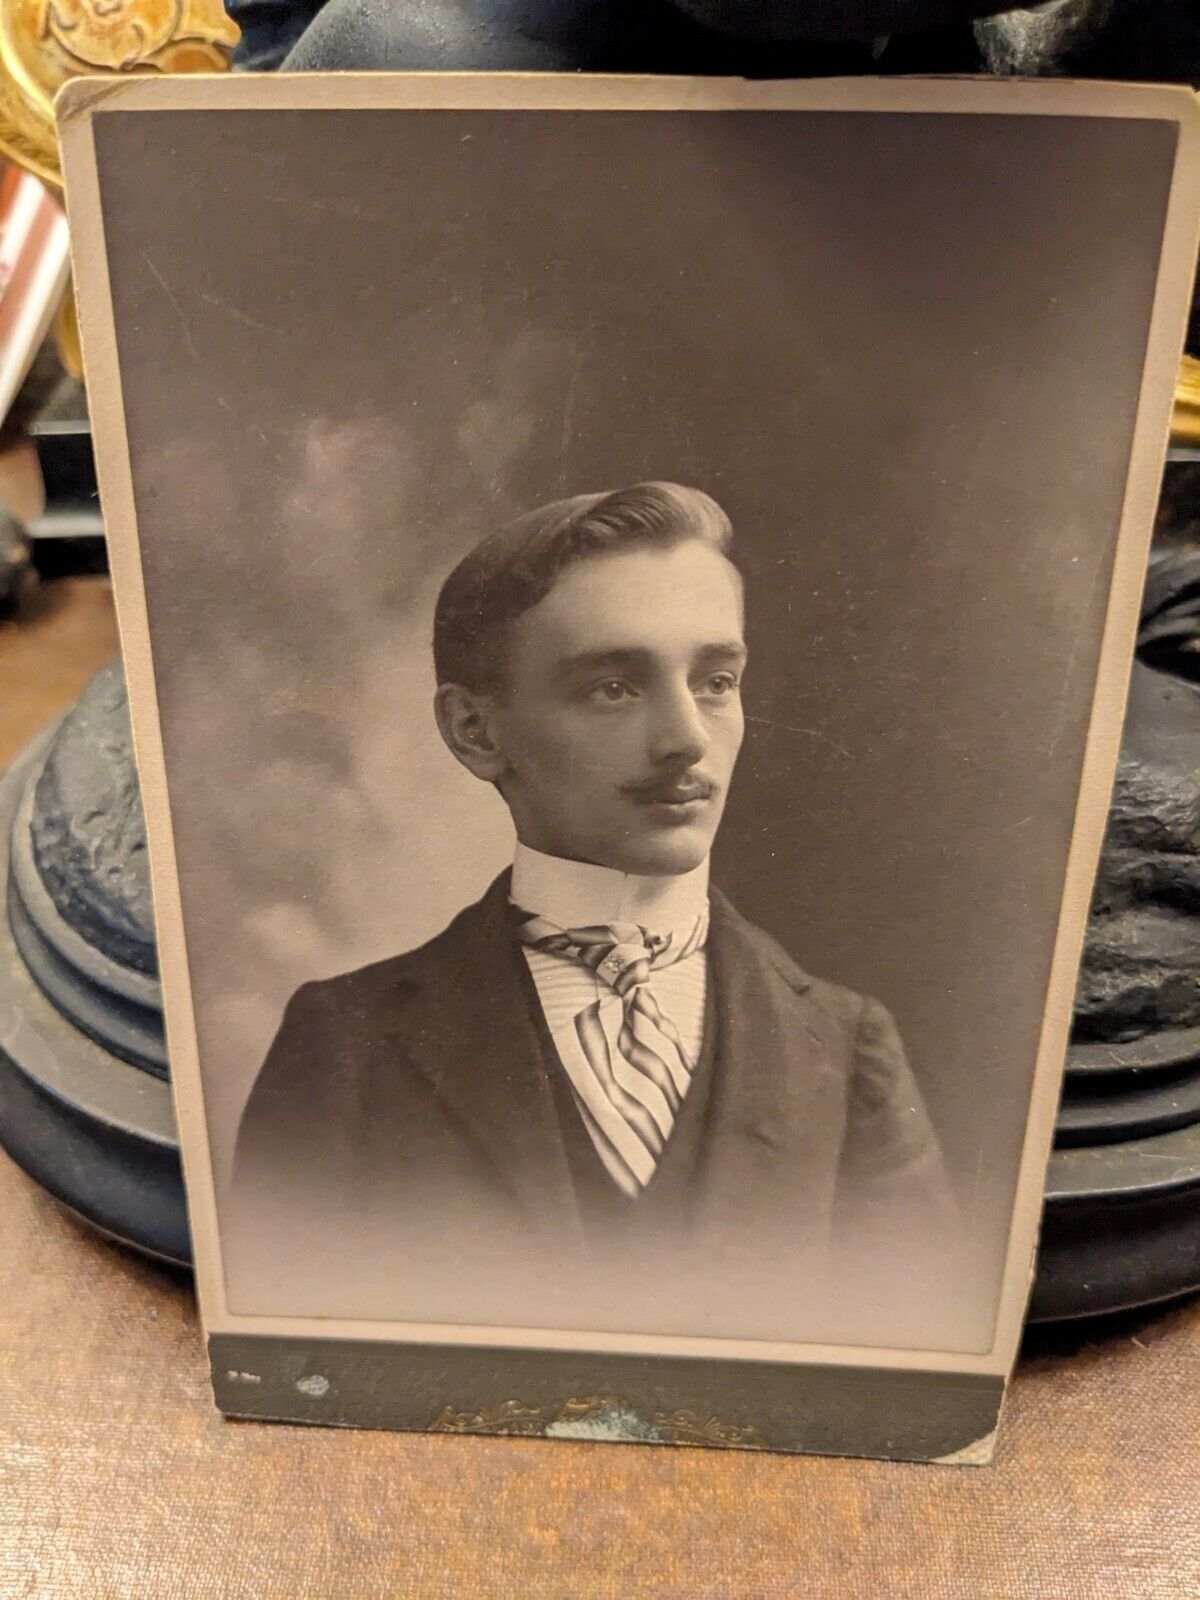 circa early 1900s photograph portrait of attractive elegantly dressed young man